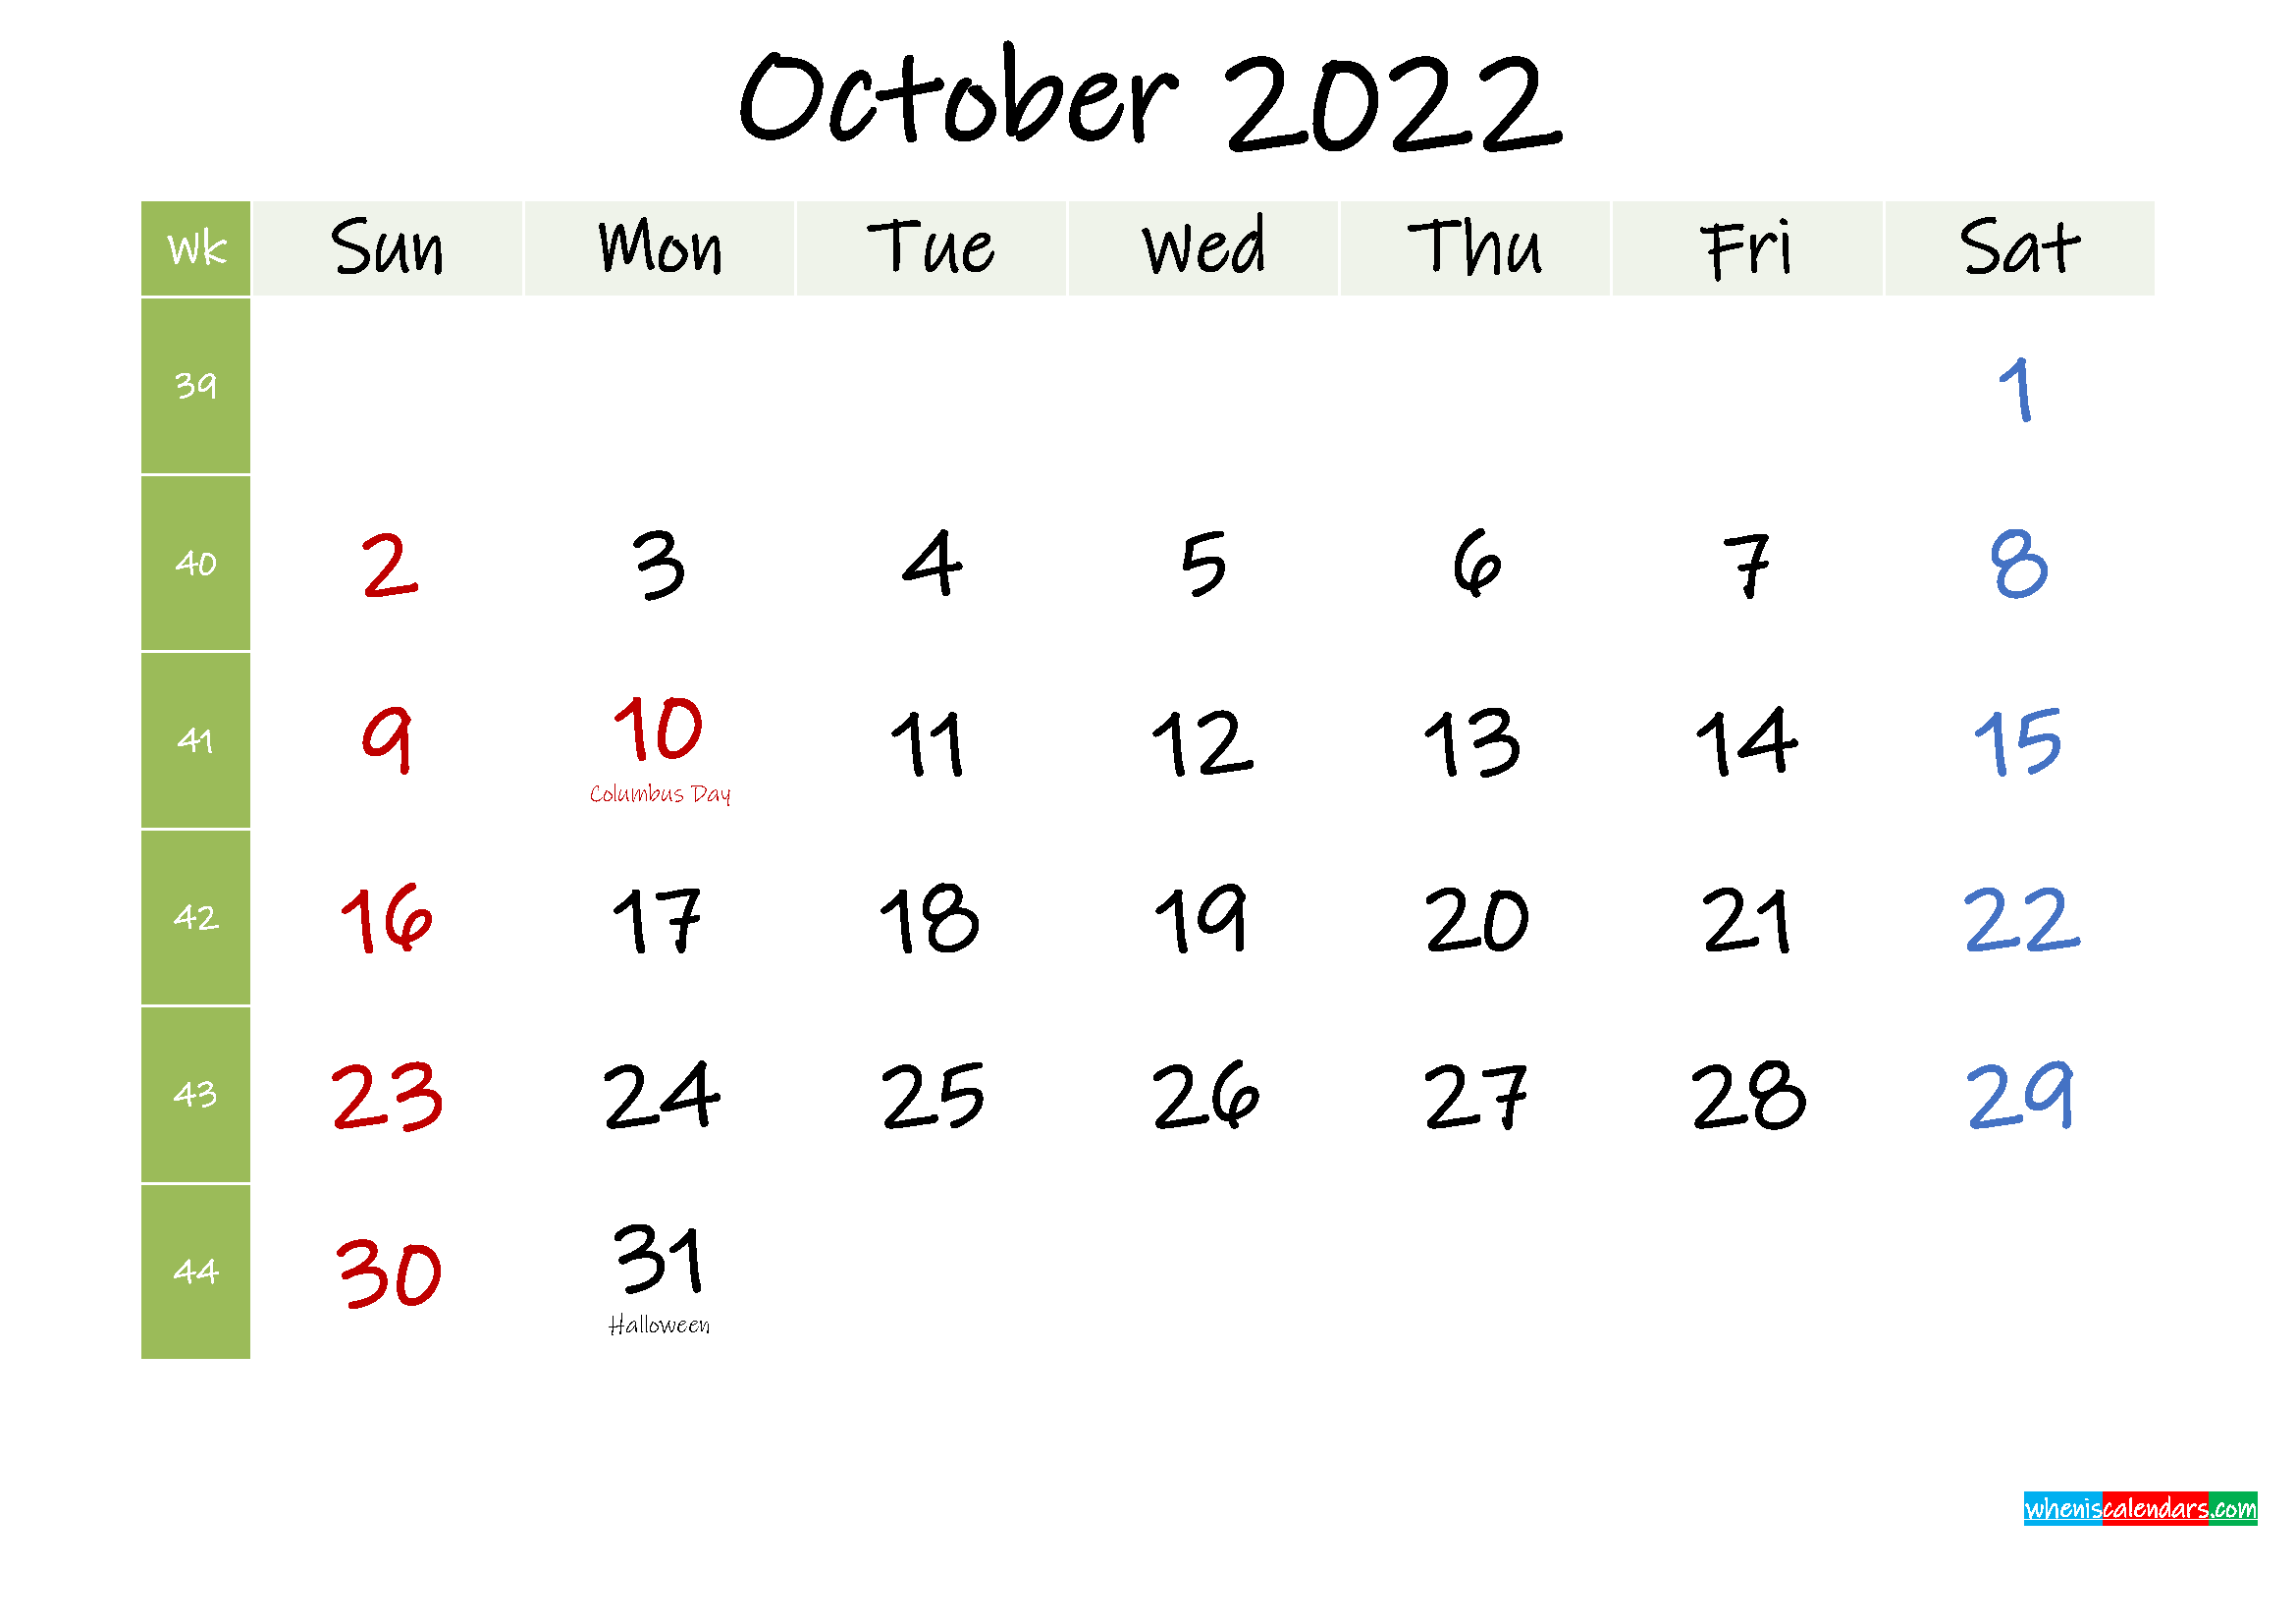 Determining the Number of Wednesdays in a Calendar Year An Essential